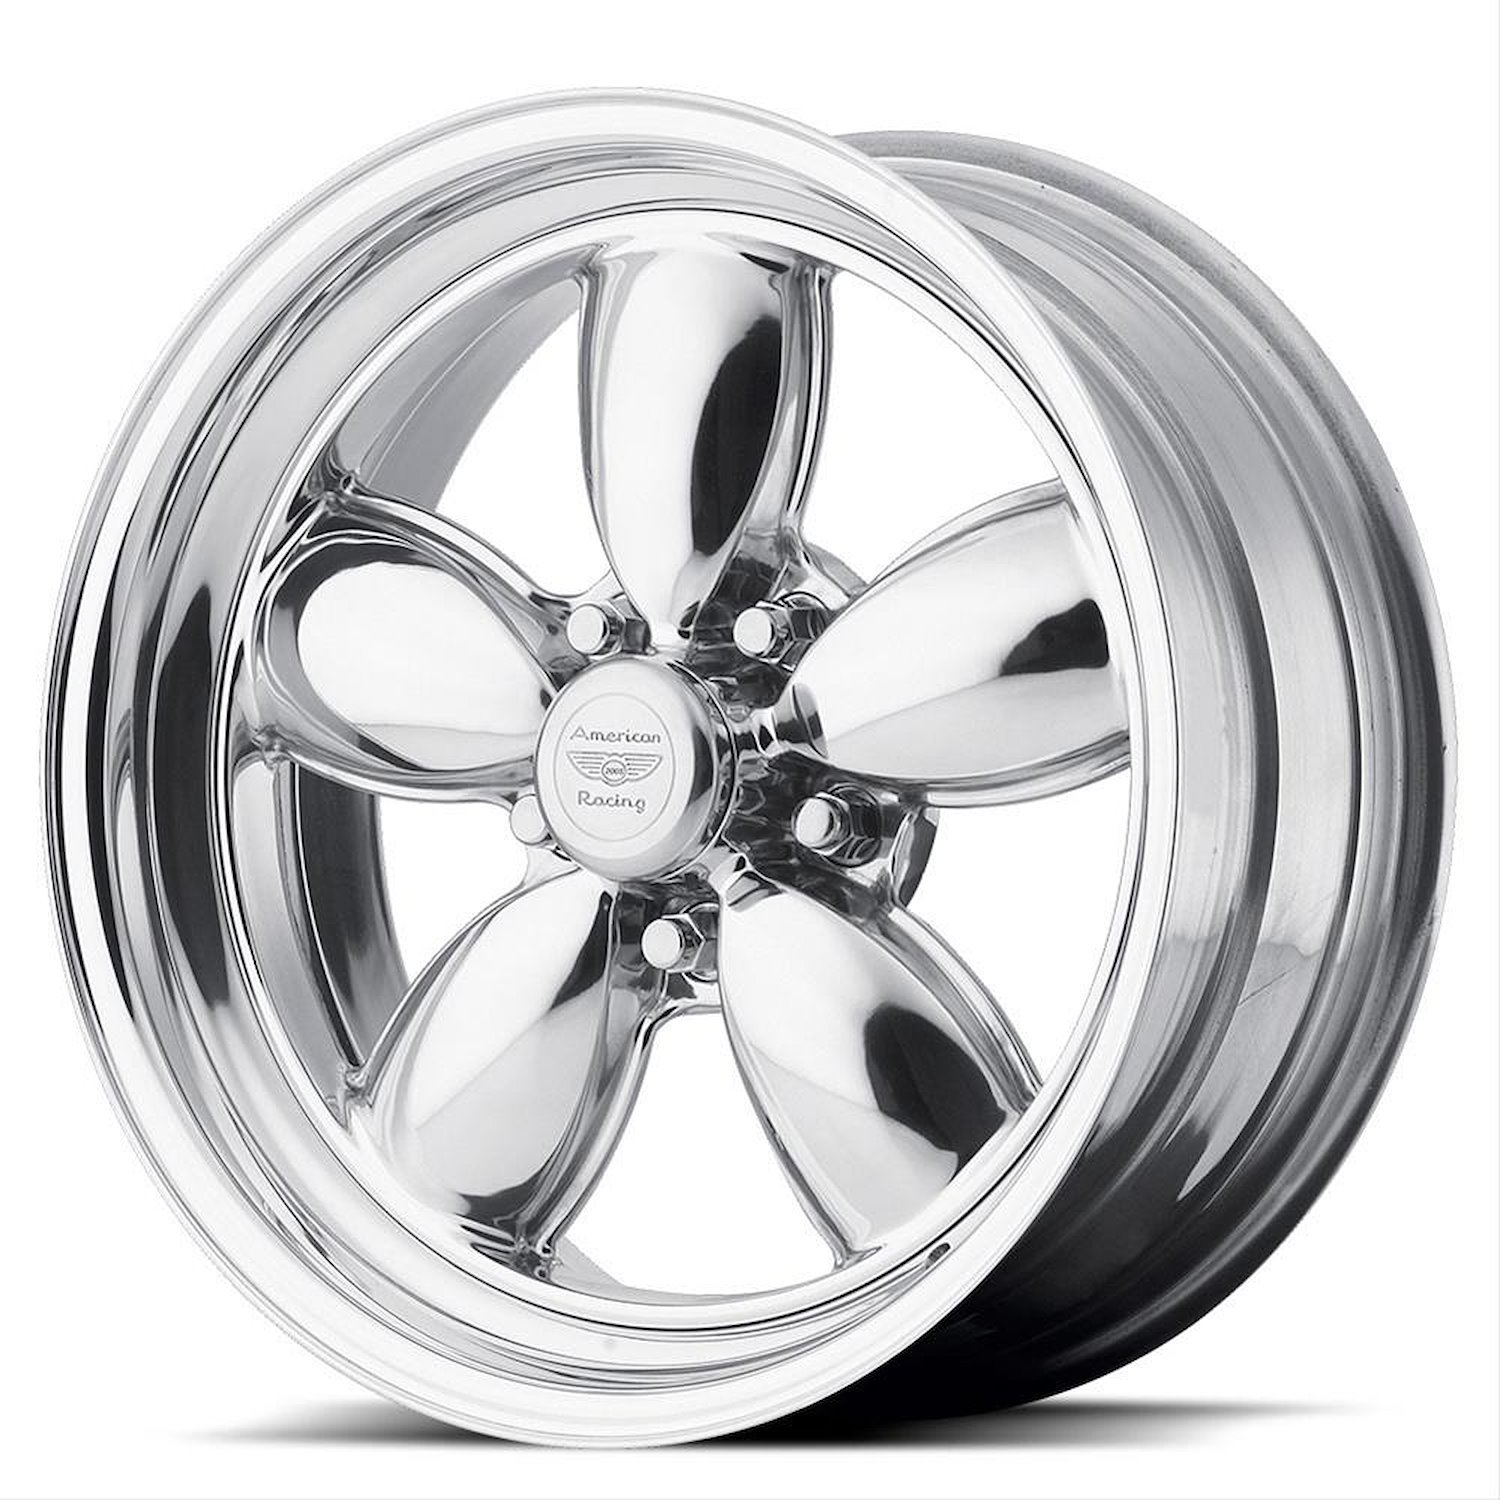 AMERICAN RACING CLASSIC 200S TWO-PIECE POLISHED 15 x 10 5x4.5 -19 4.75